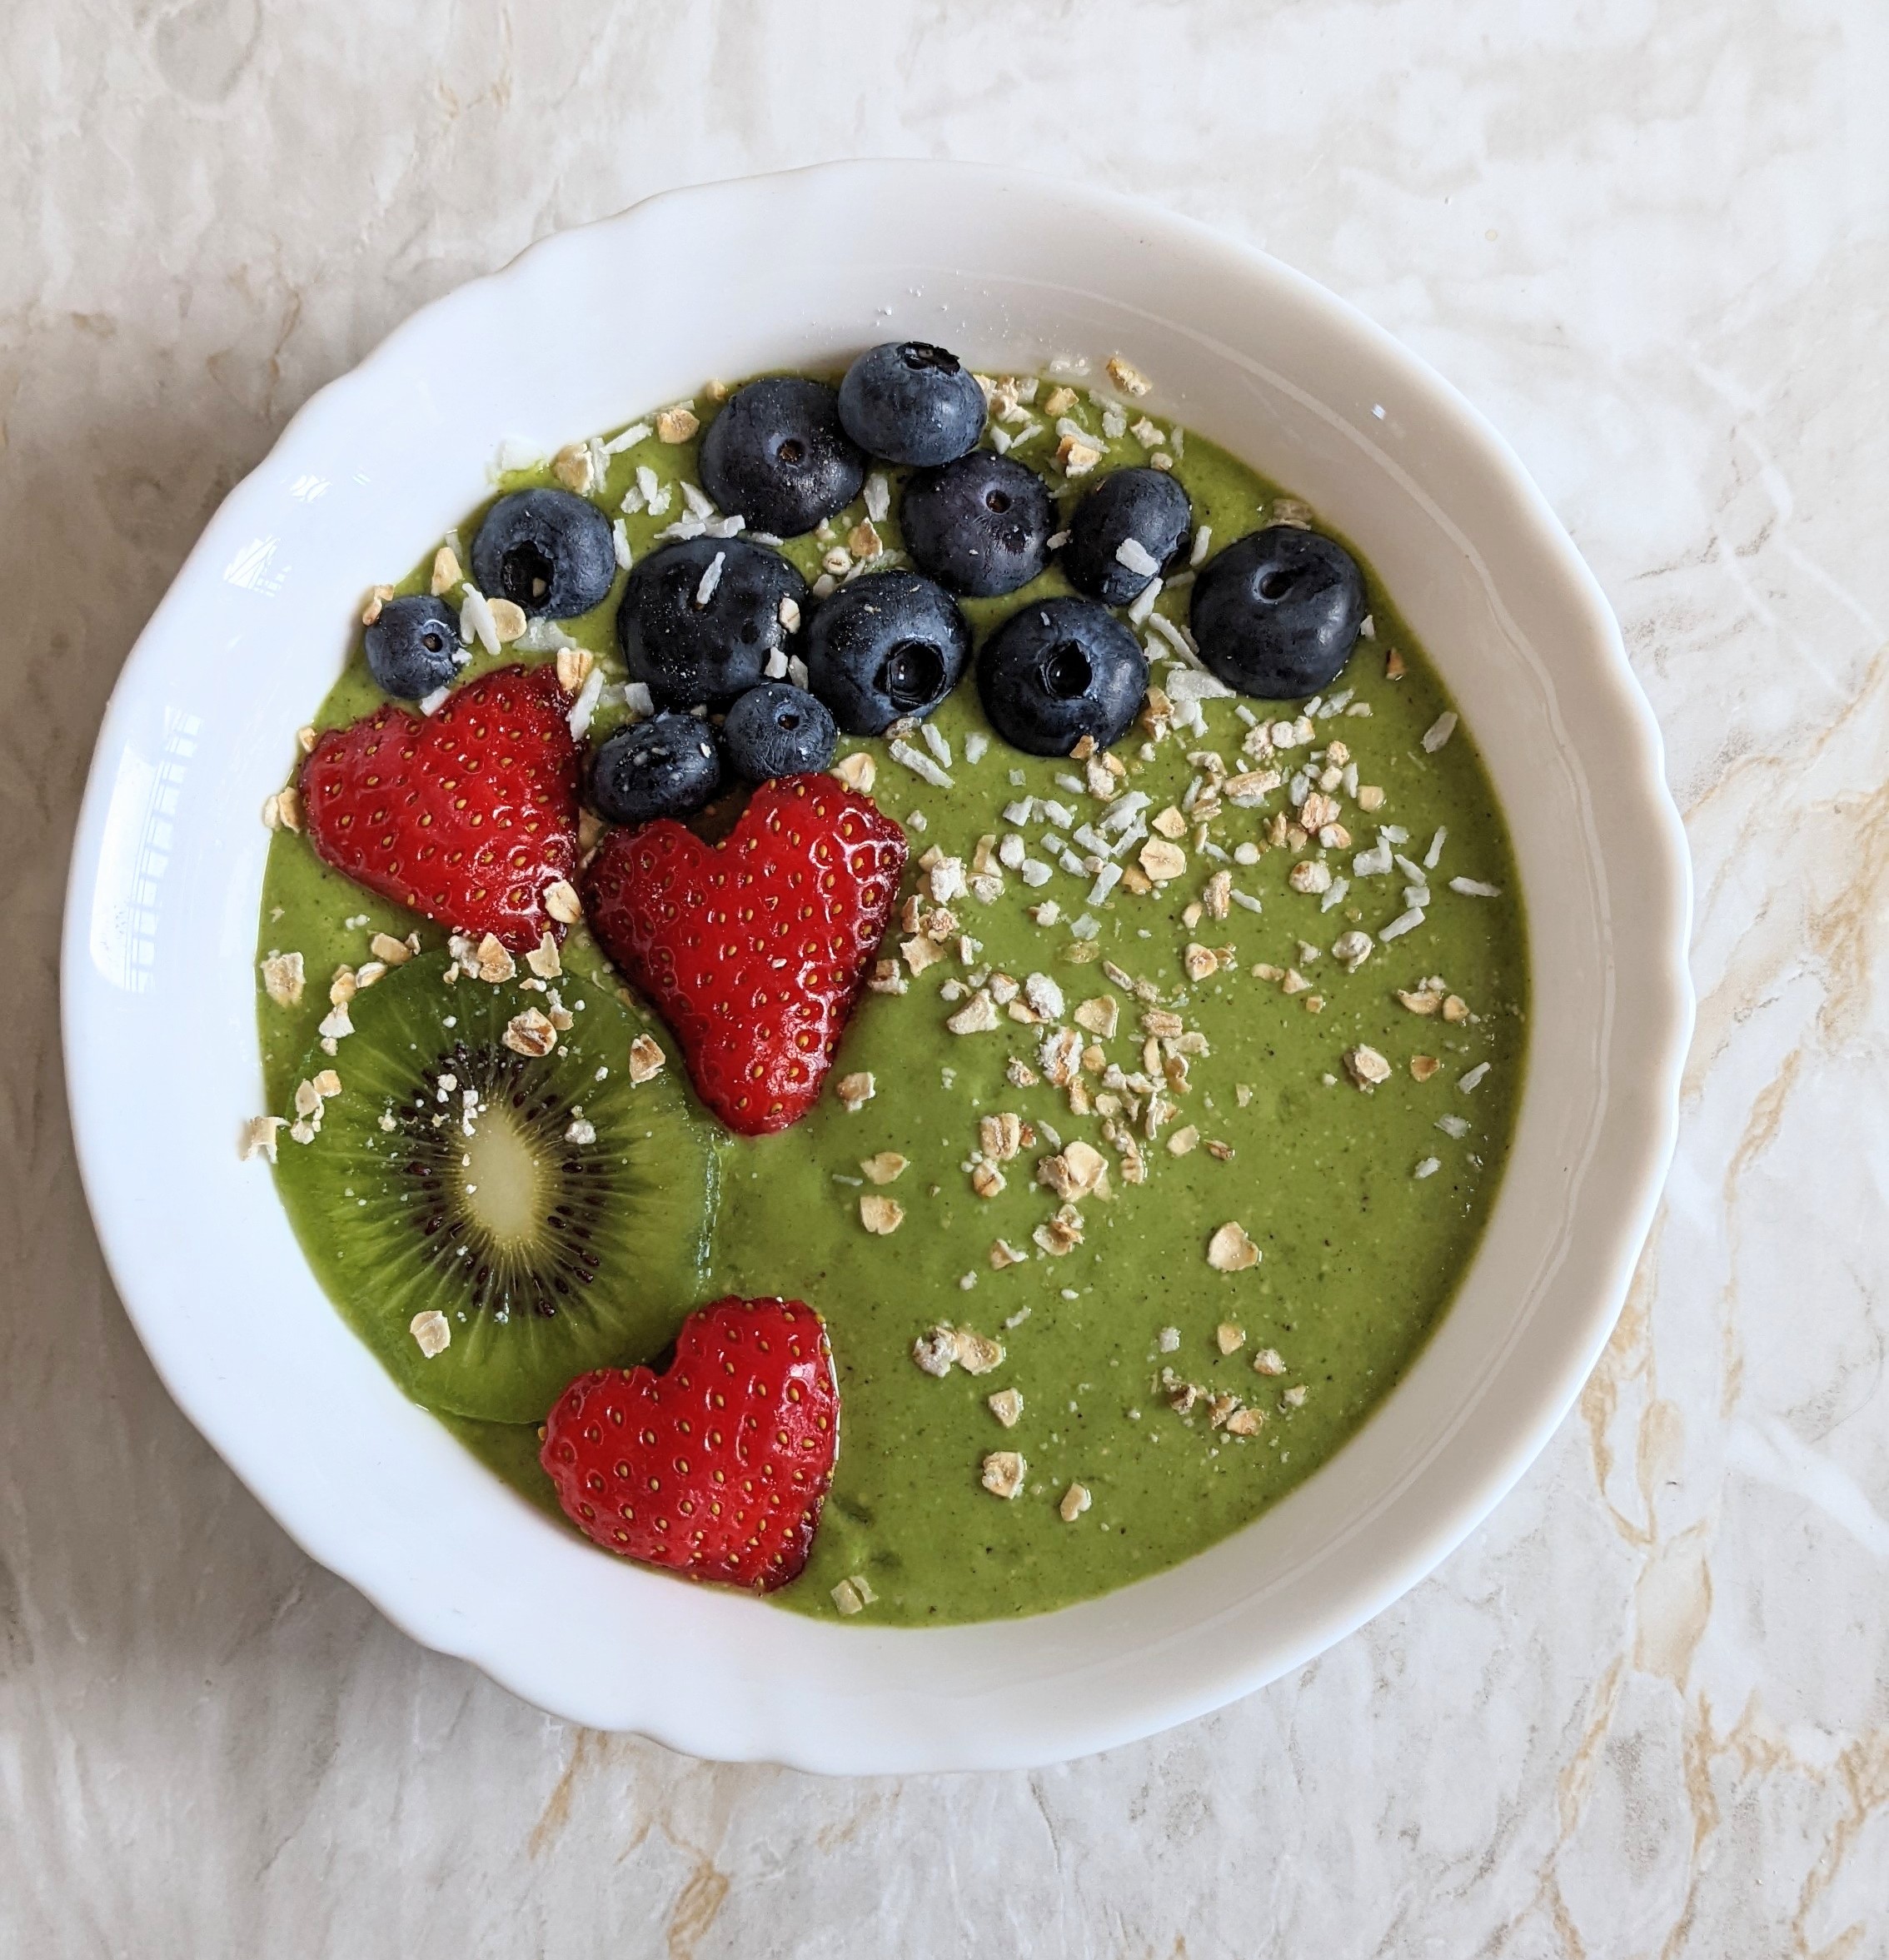 spinach-smoothie-with-banana-pineapple-moringa-powder-kiwi-fruit-chia-seeds-and-oats-summer-heatwave-oats-breakfast-breakfast-ideas-vegan-recipes-green-smoothie-recipes